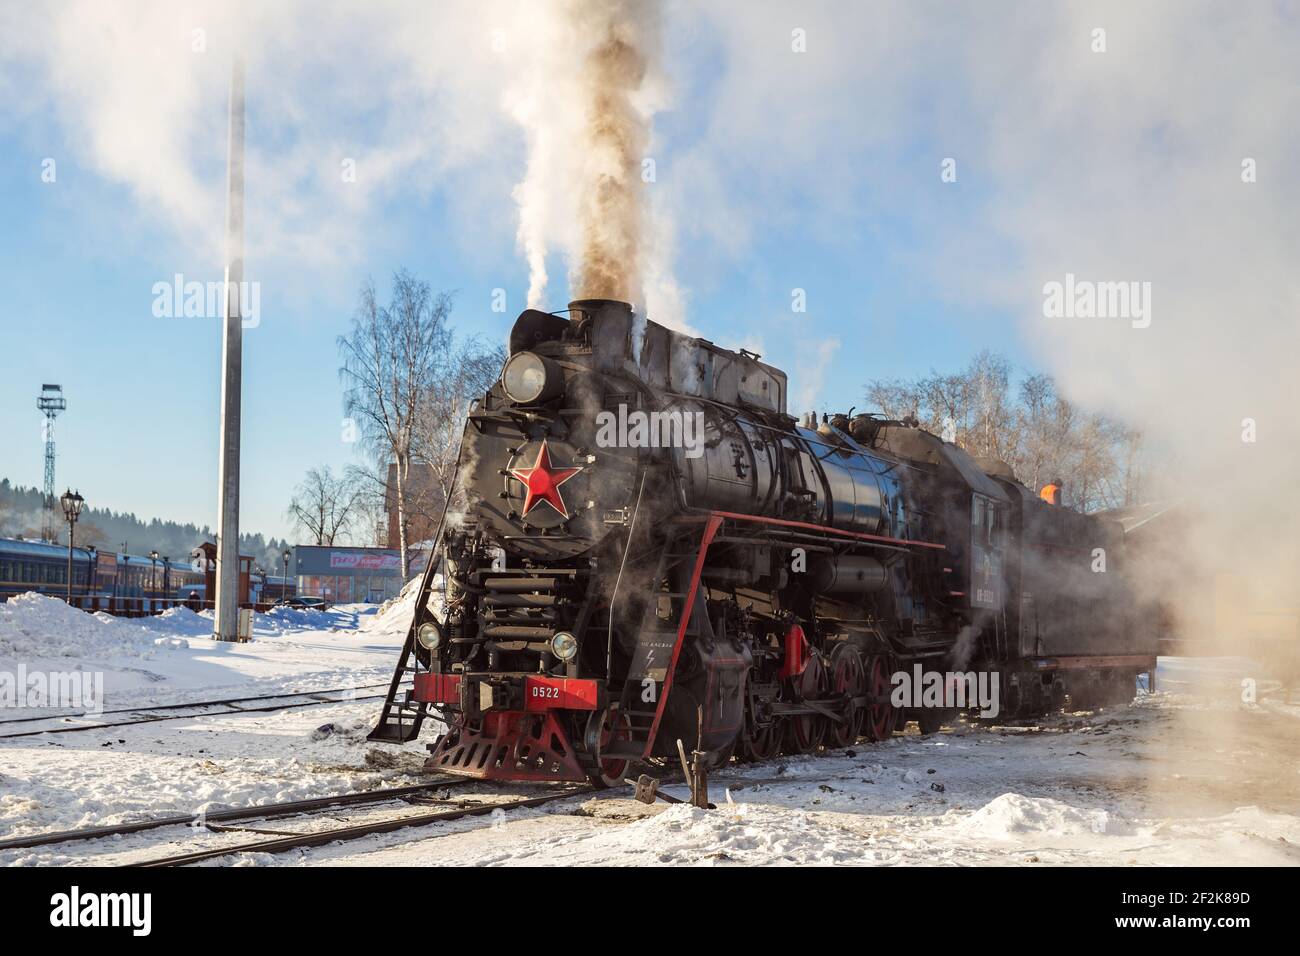 SORTAVALA, RUSSIA - MARCH 10, 2021: Steam locomotive LV-0522 (built in 1956) at Sortavala station getting ready for operation Stock Photo